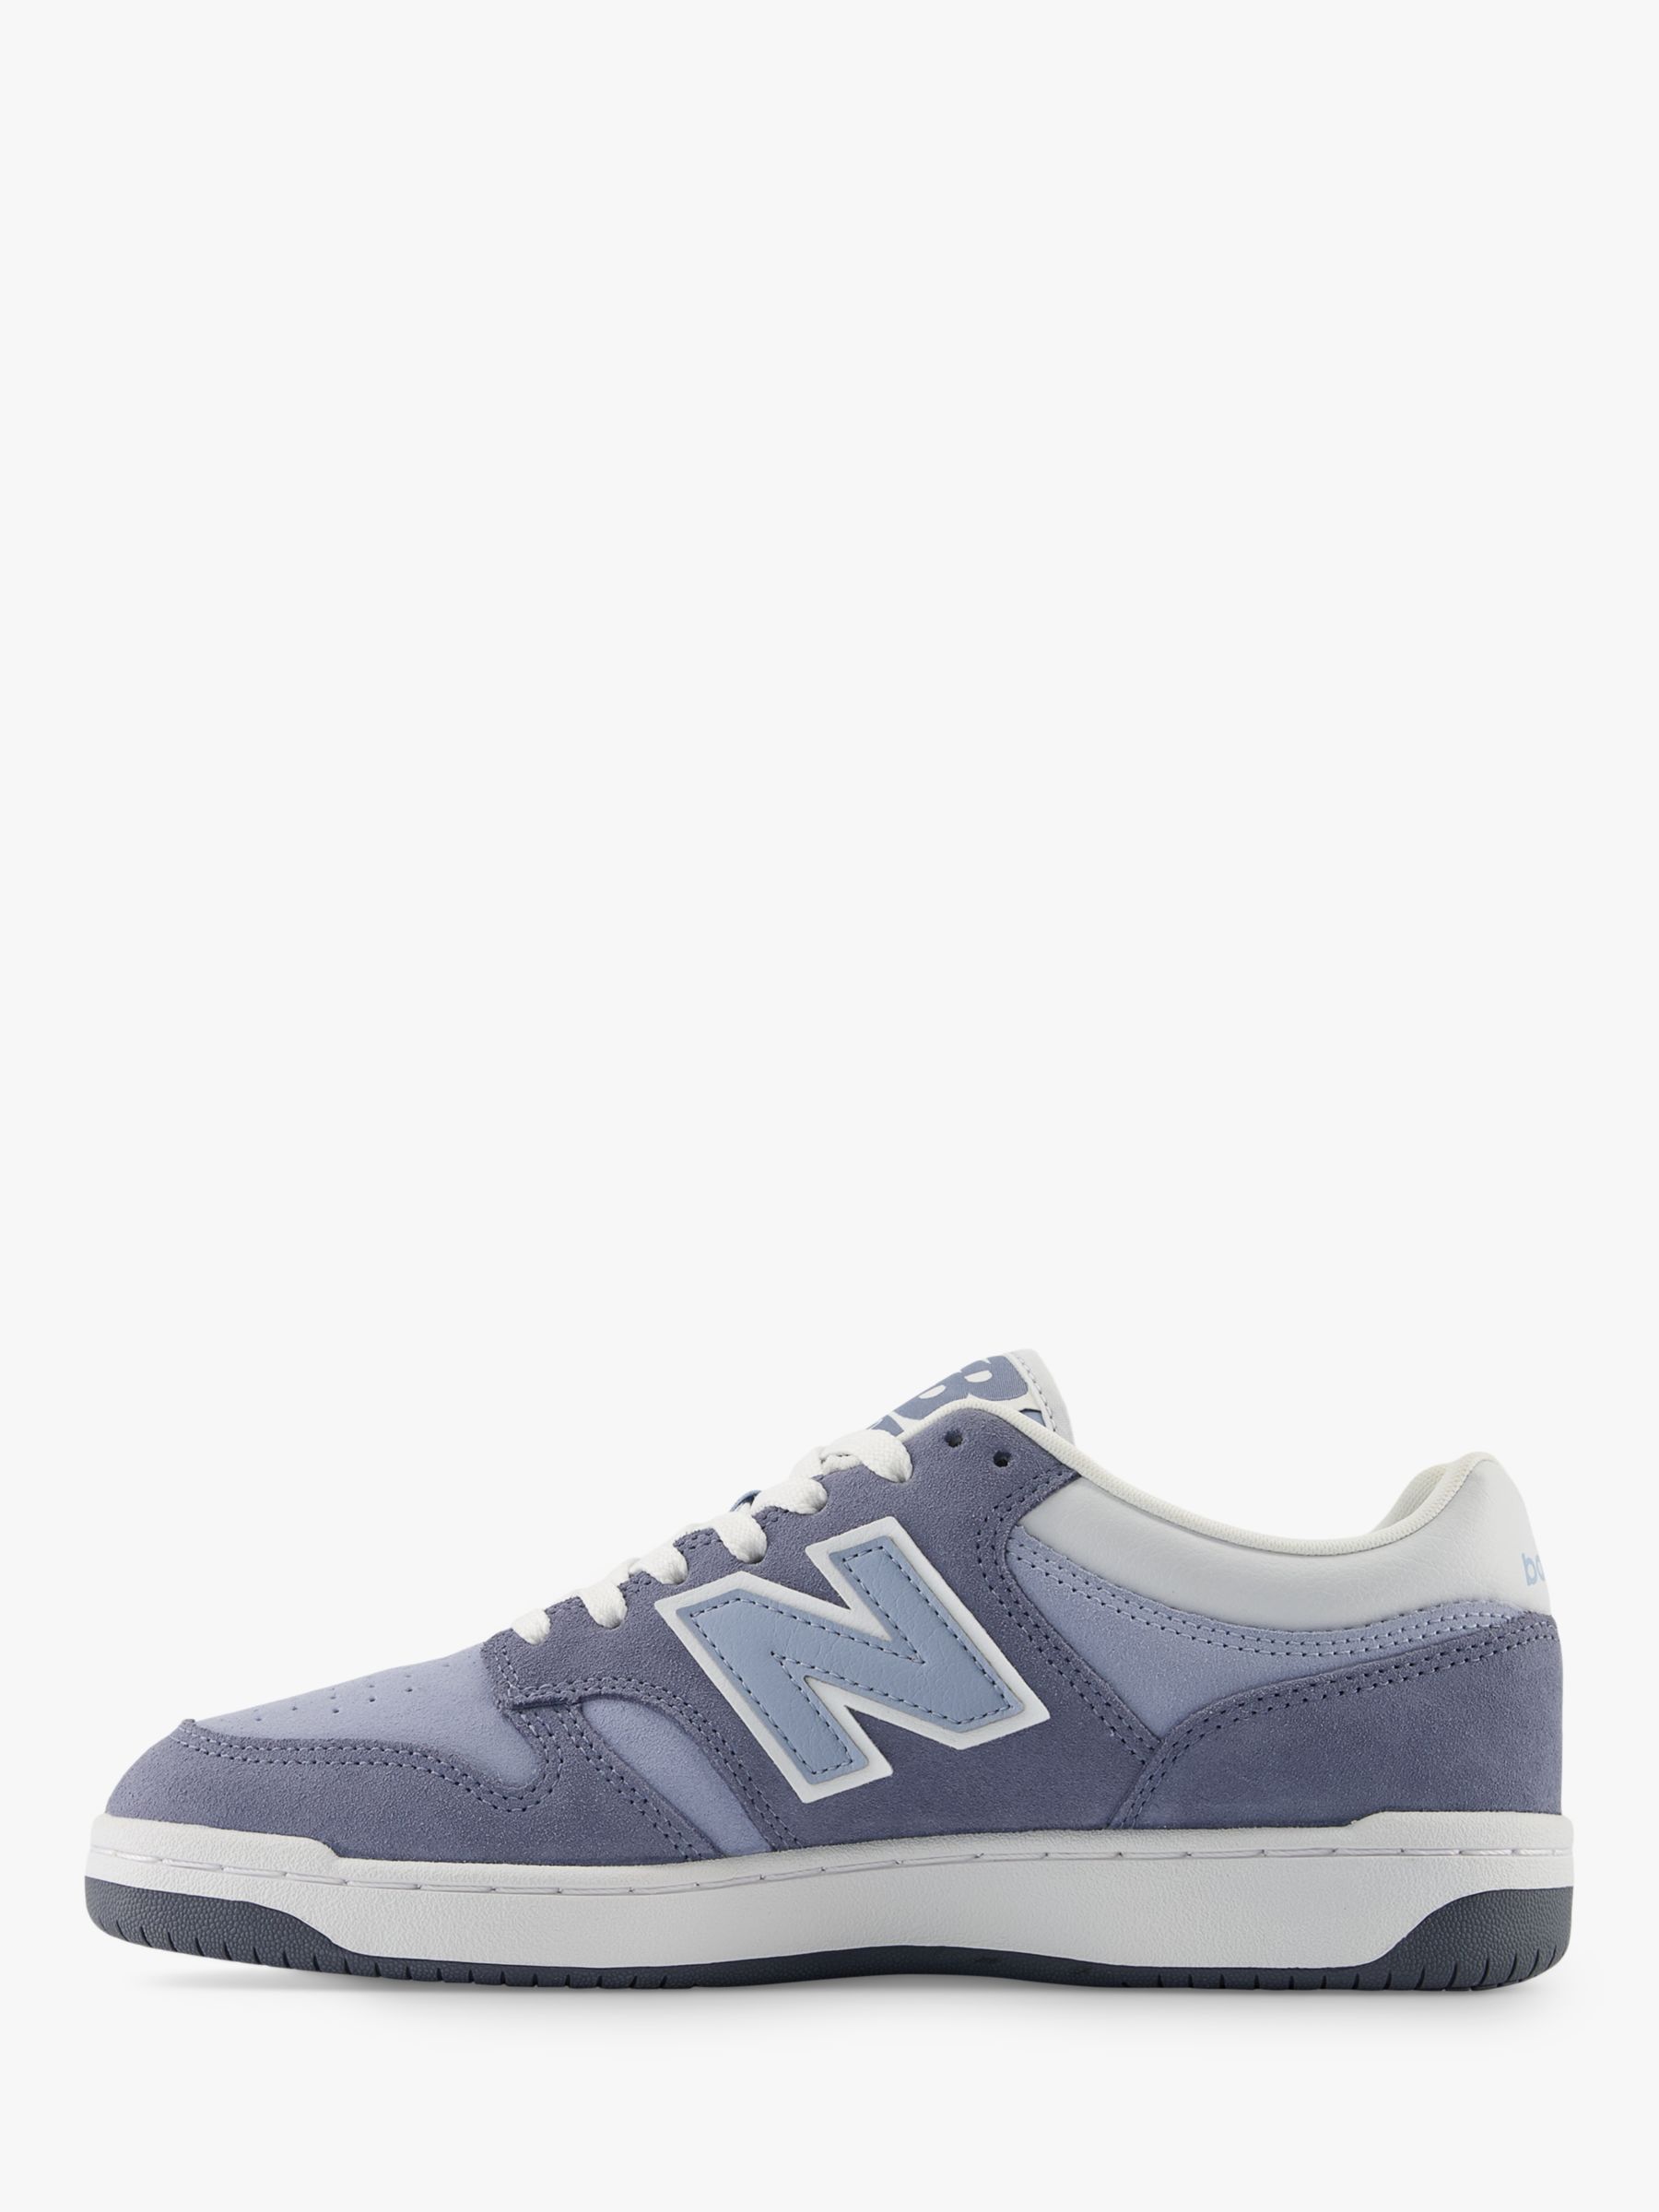 New Balance 480 Lace Up Trainers, Grey/Multi, 7